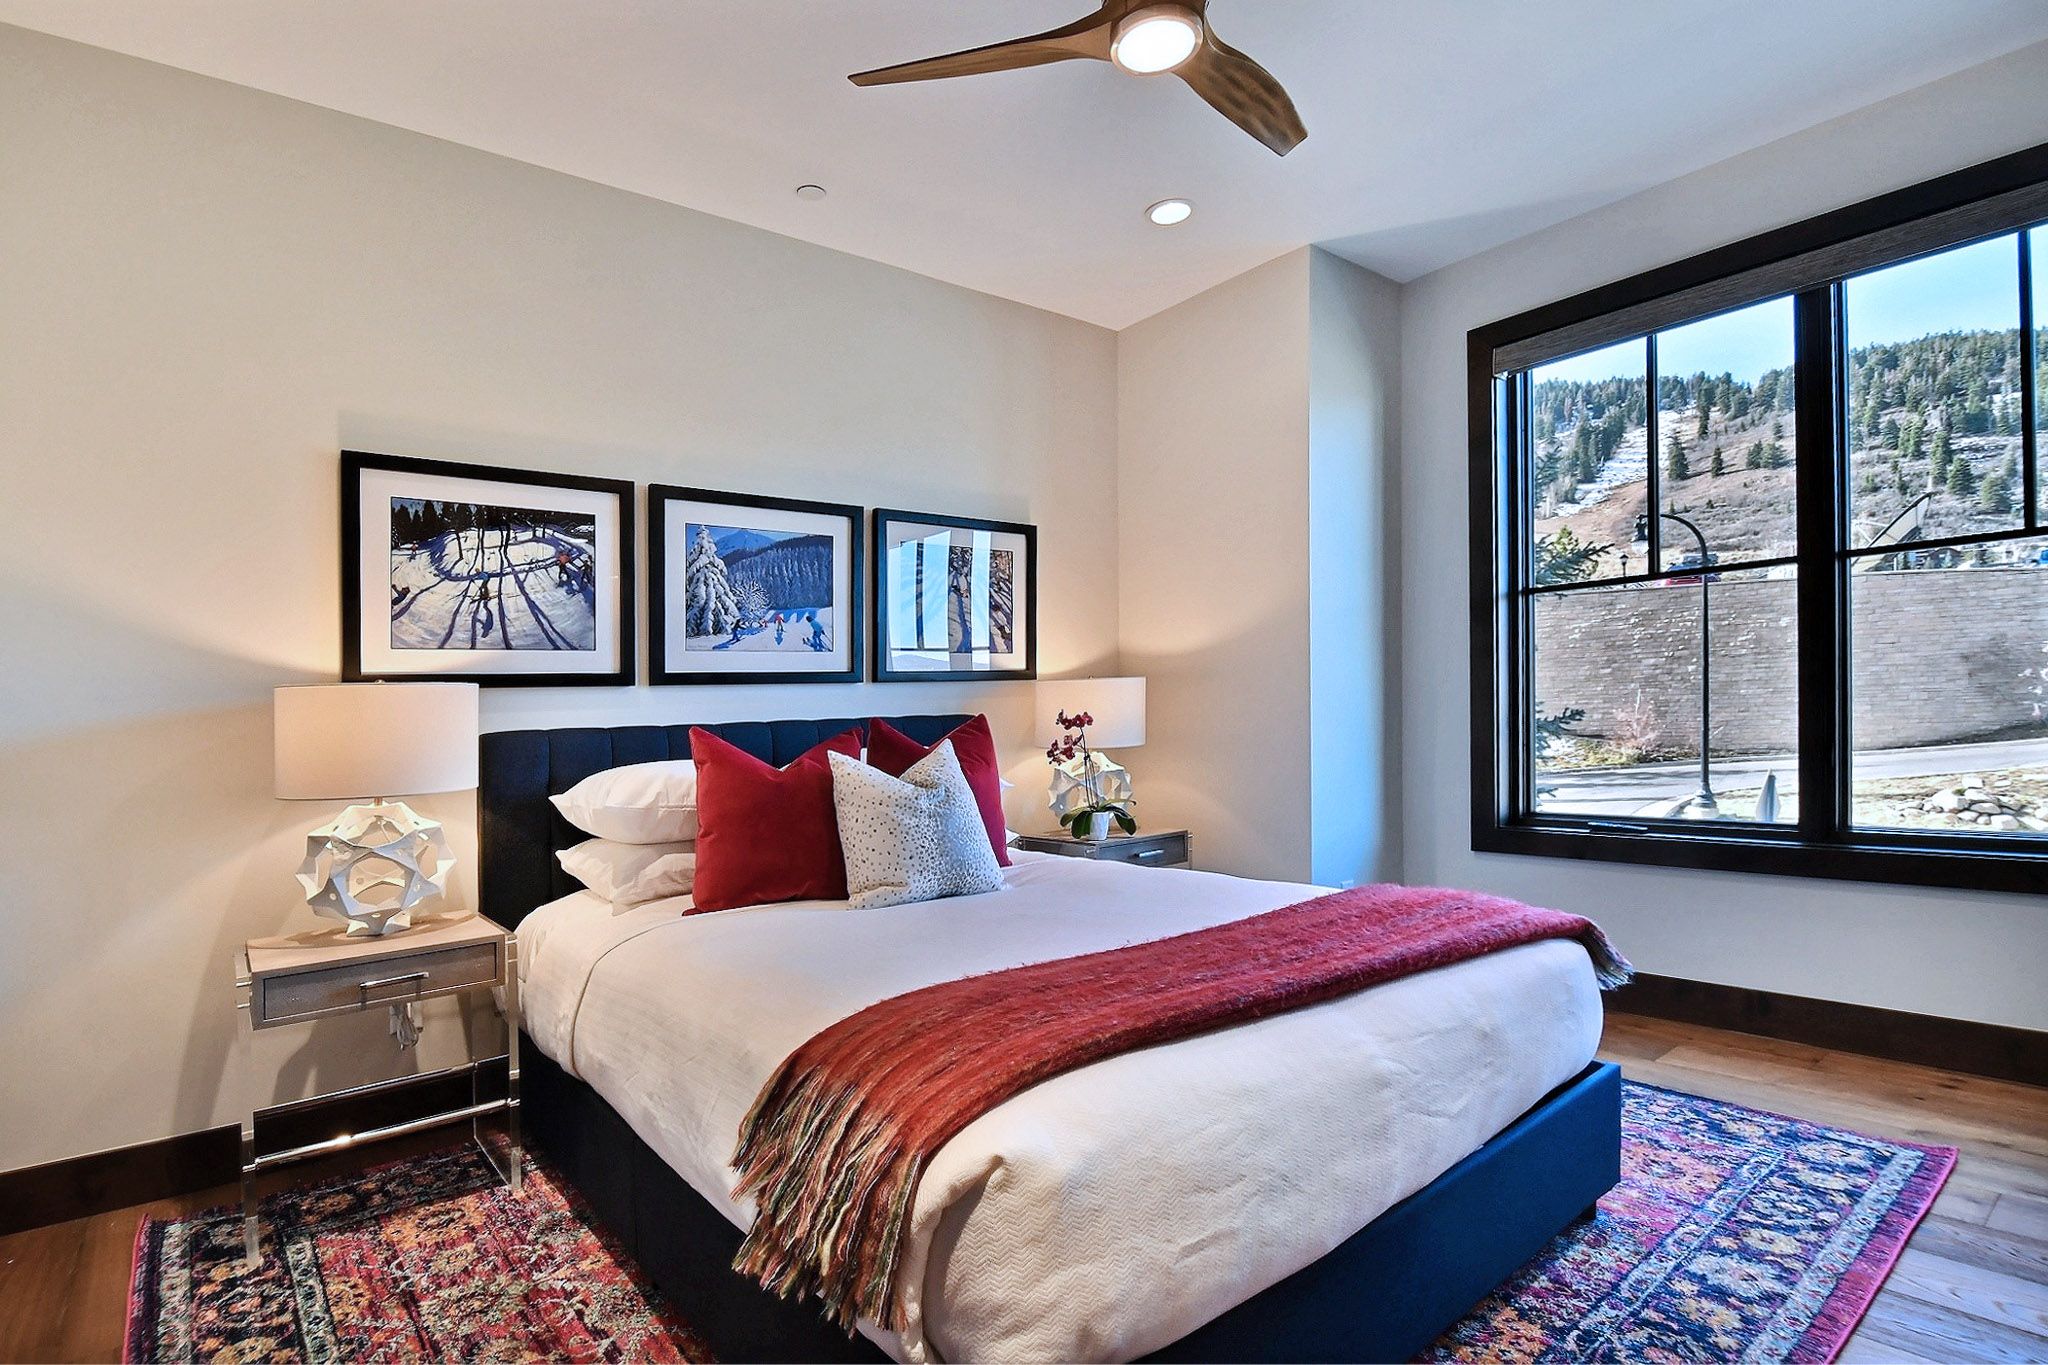 The third master bedroom suite features a queen bed, ceiling fan, HDTV and personal bathroom.